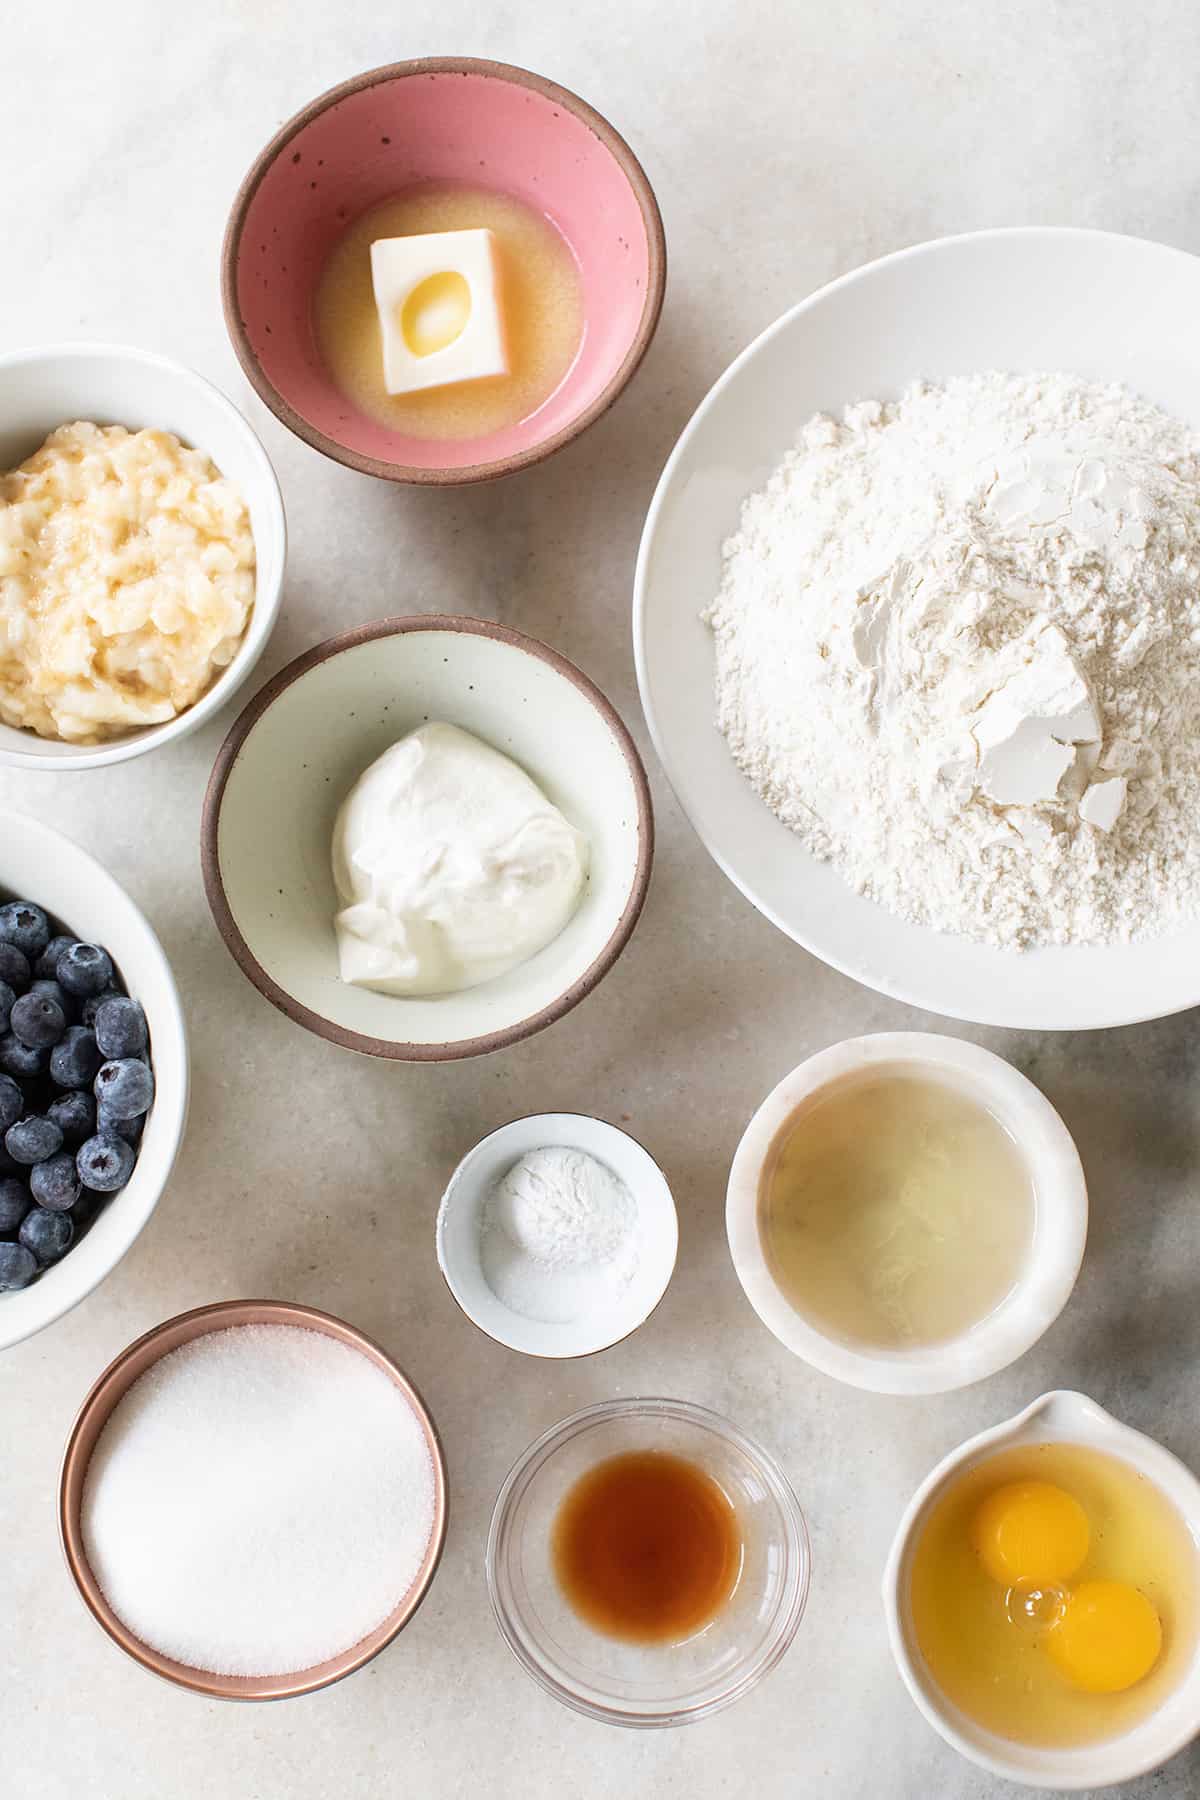 Eggs, flour, butter, sugar, vanilla, oil, sour cream, and blueberries in small bowls.